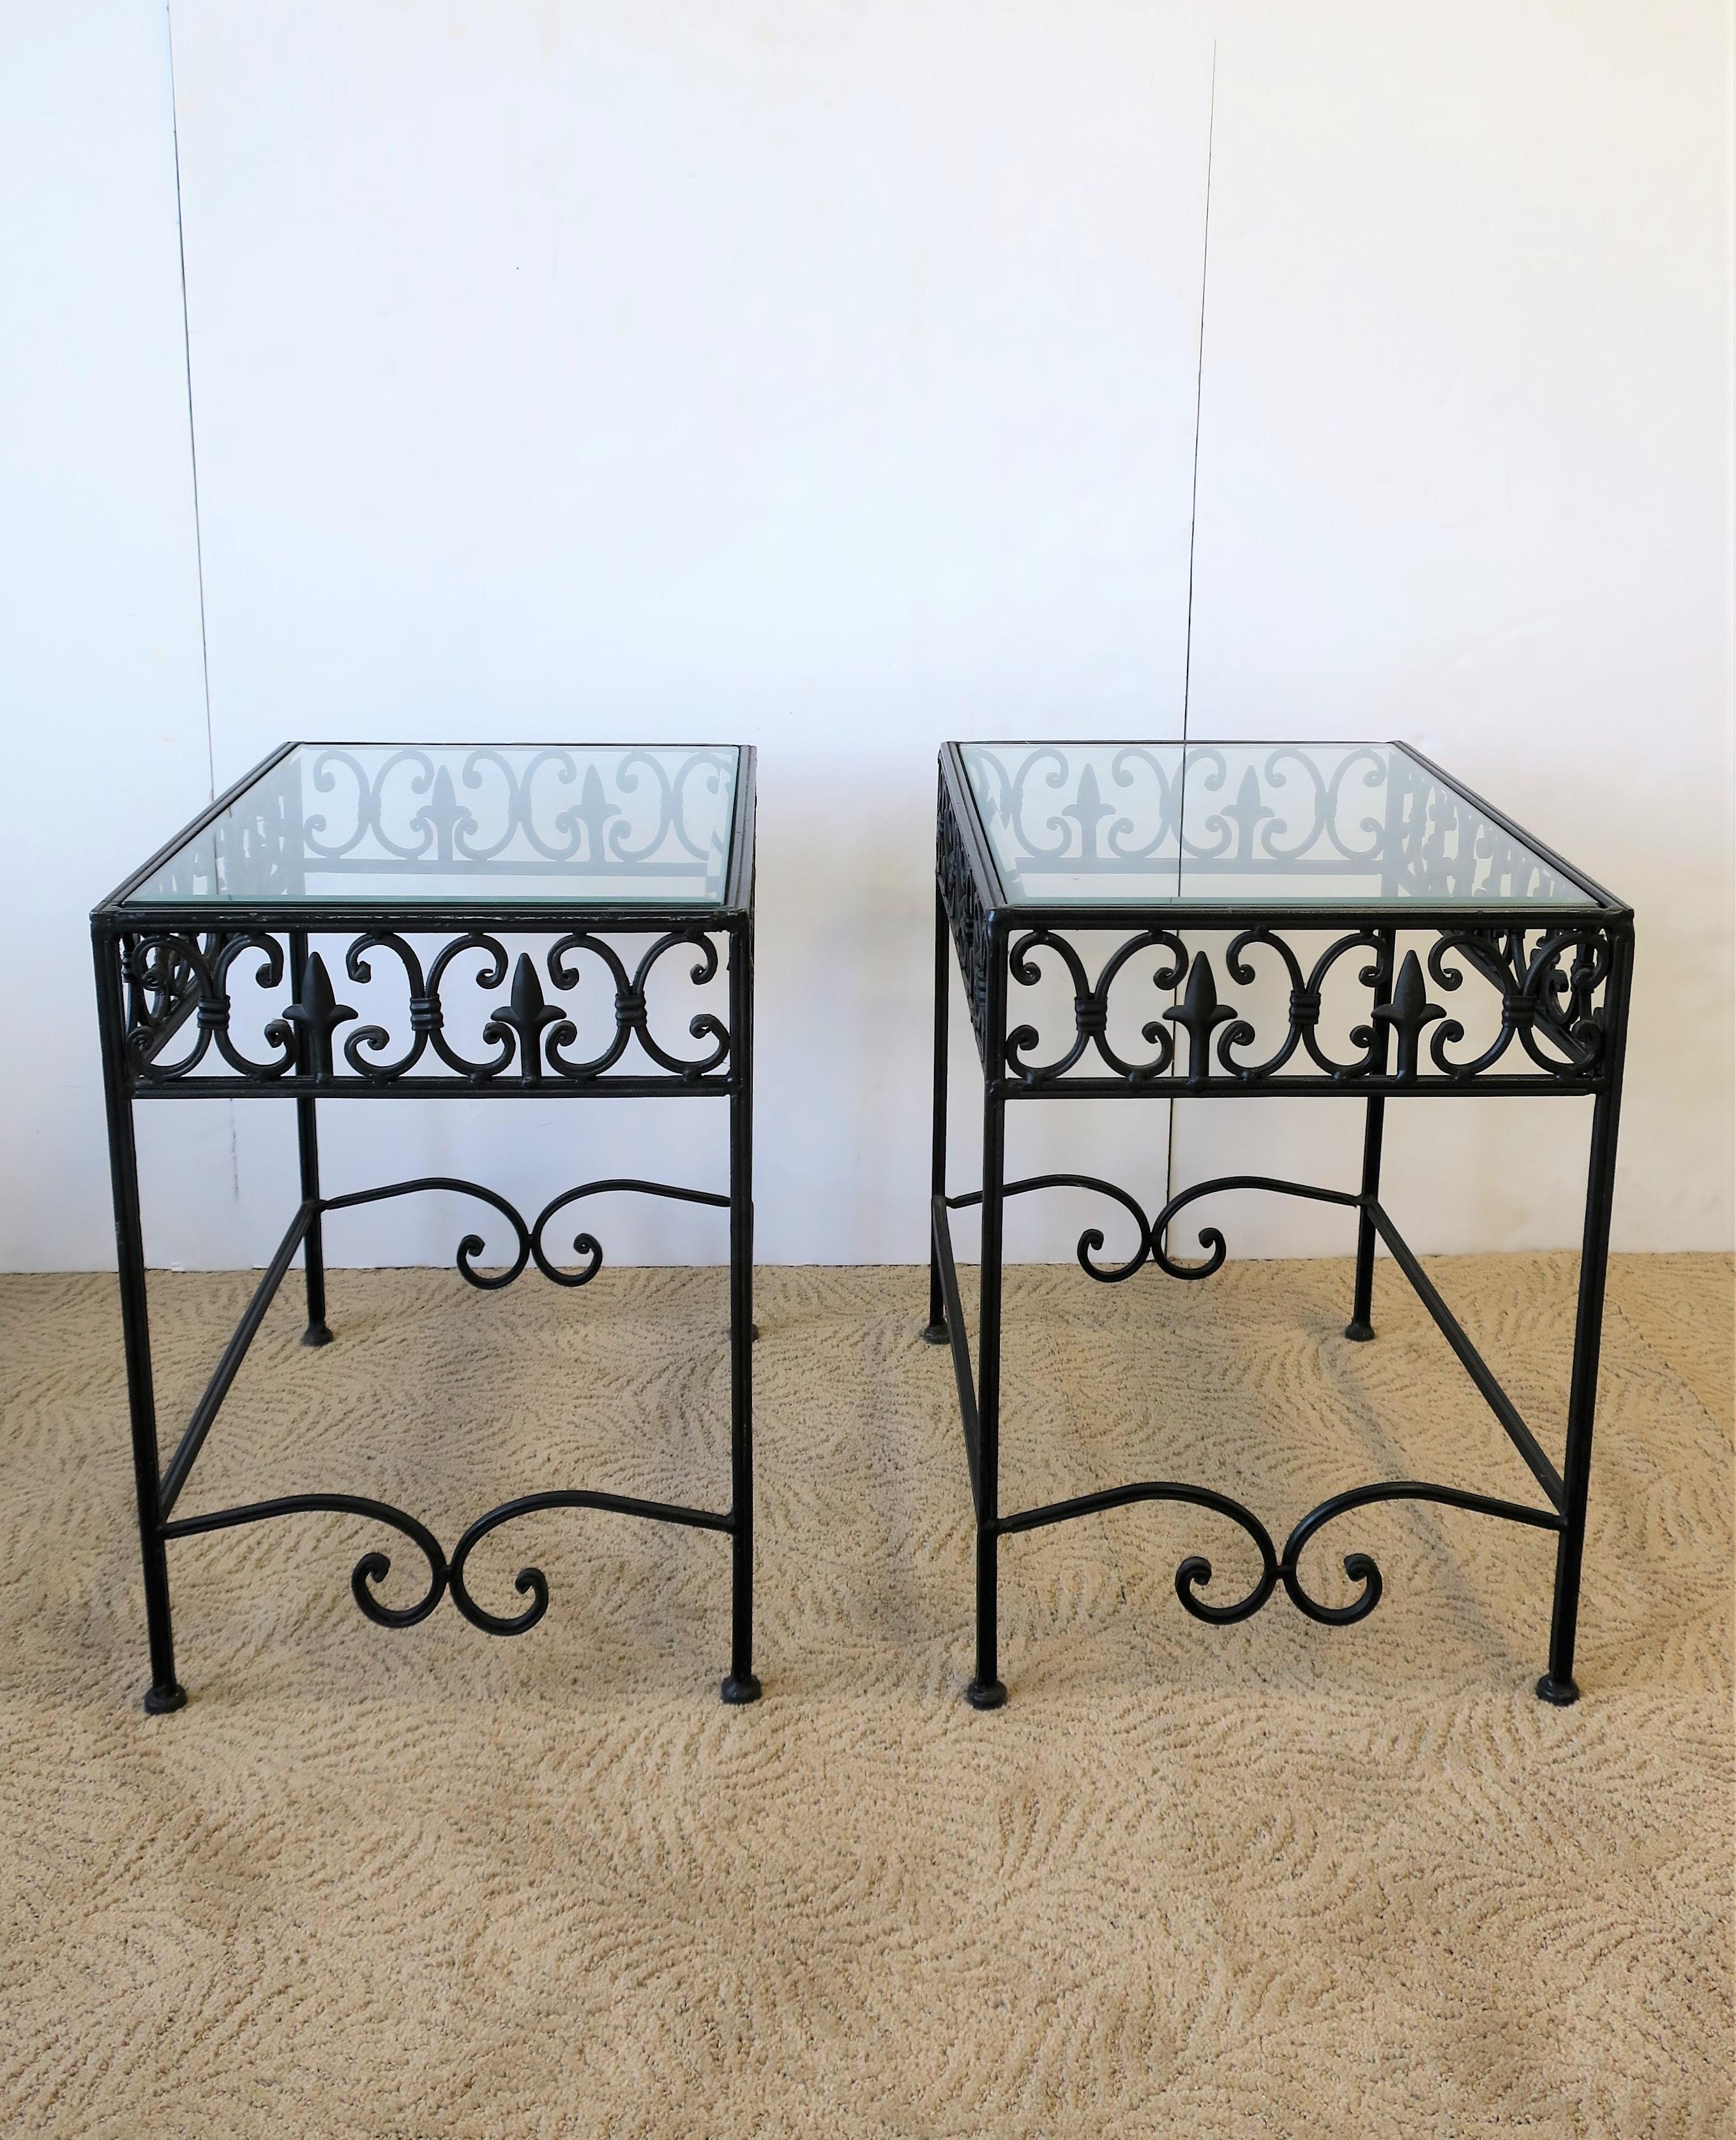 A beautiful and substantial pair of outdoor patio/terrace/garden rectangular black metal and glass end tables with a 'fleur-de-lis' type design, circa late 20th century. Glass tops have beveled edge and sit 'inset' into table bases, with no glass